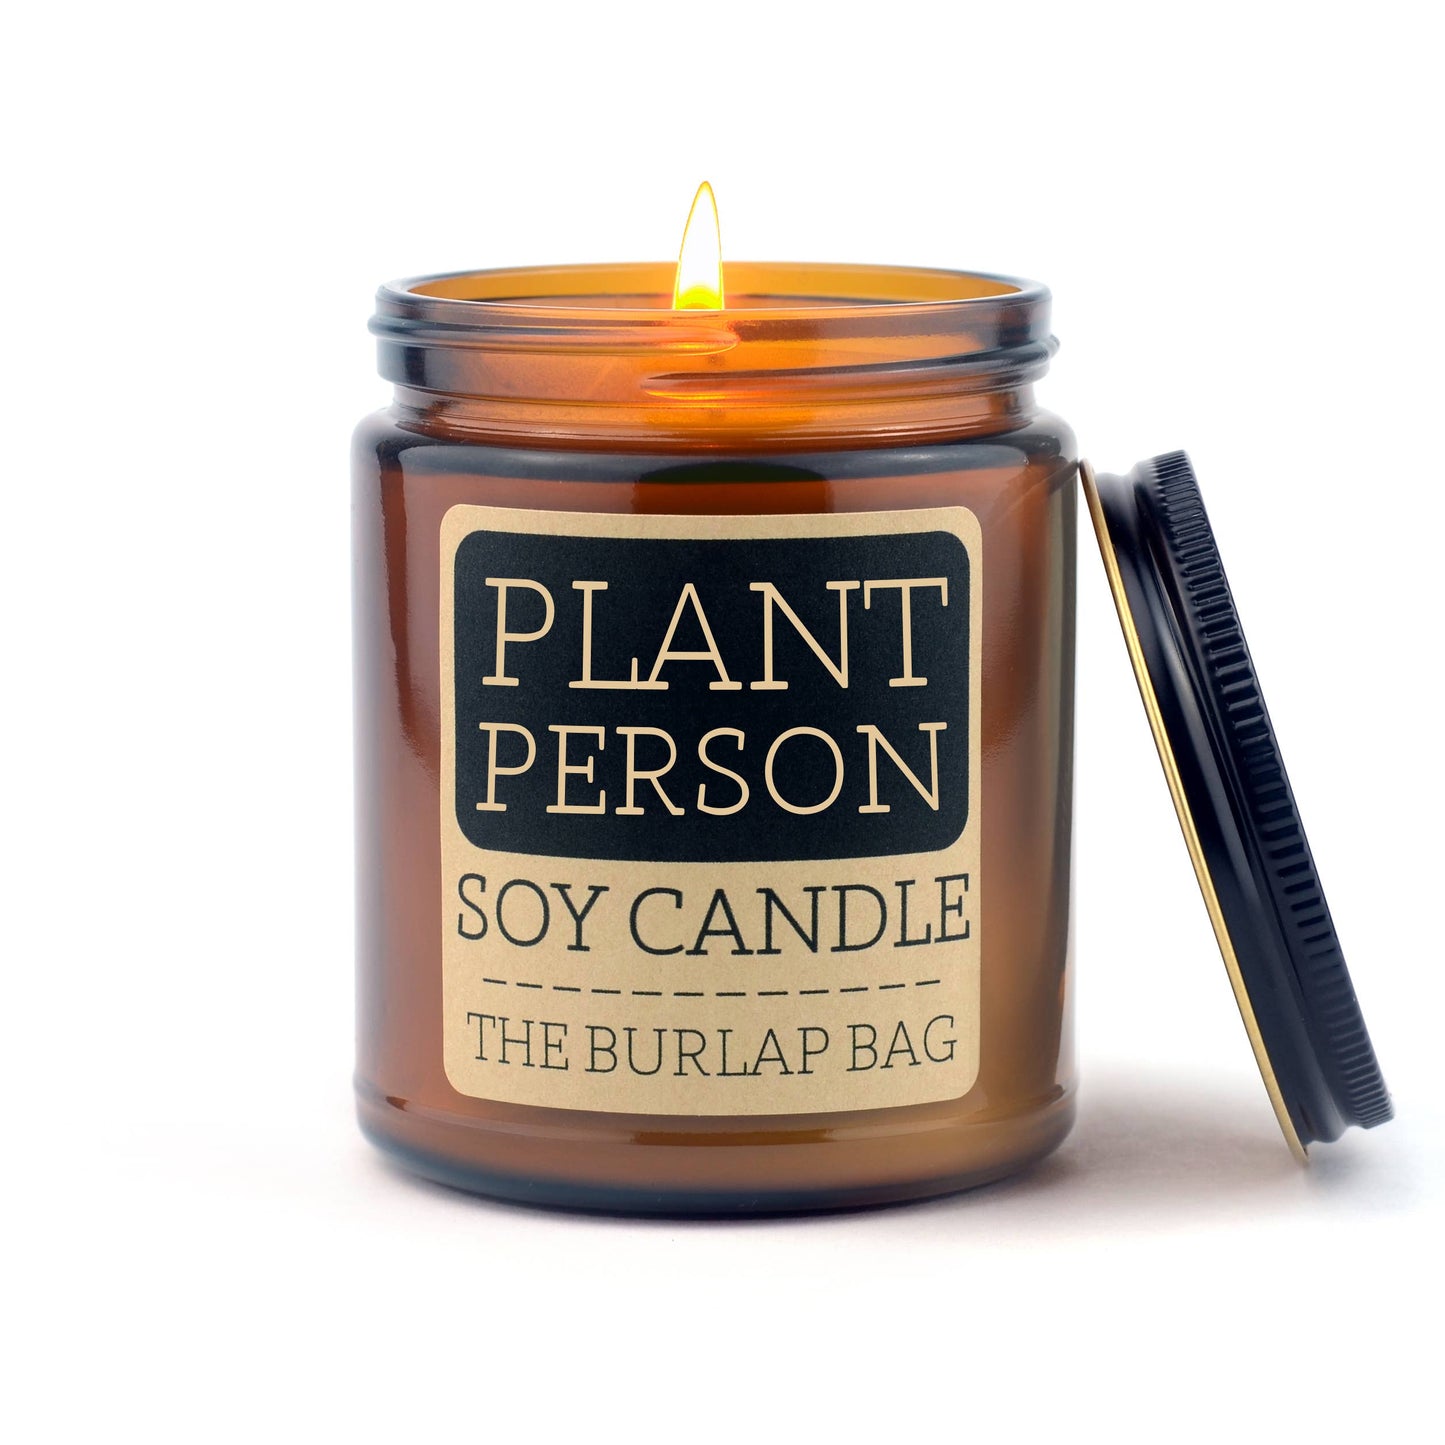 Plant Person Soy Candle